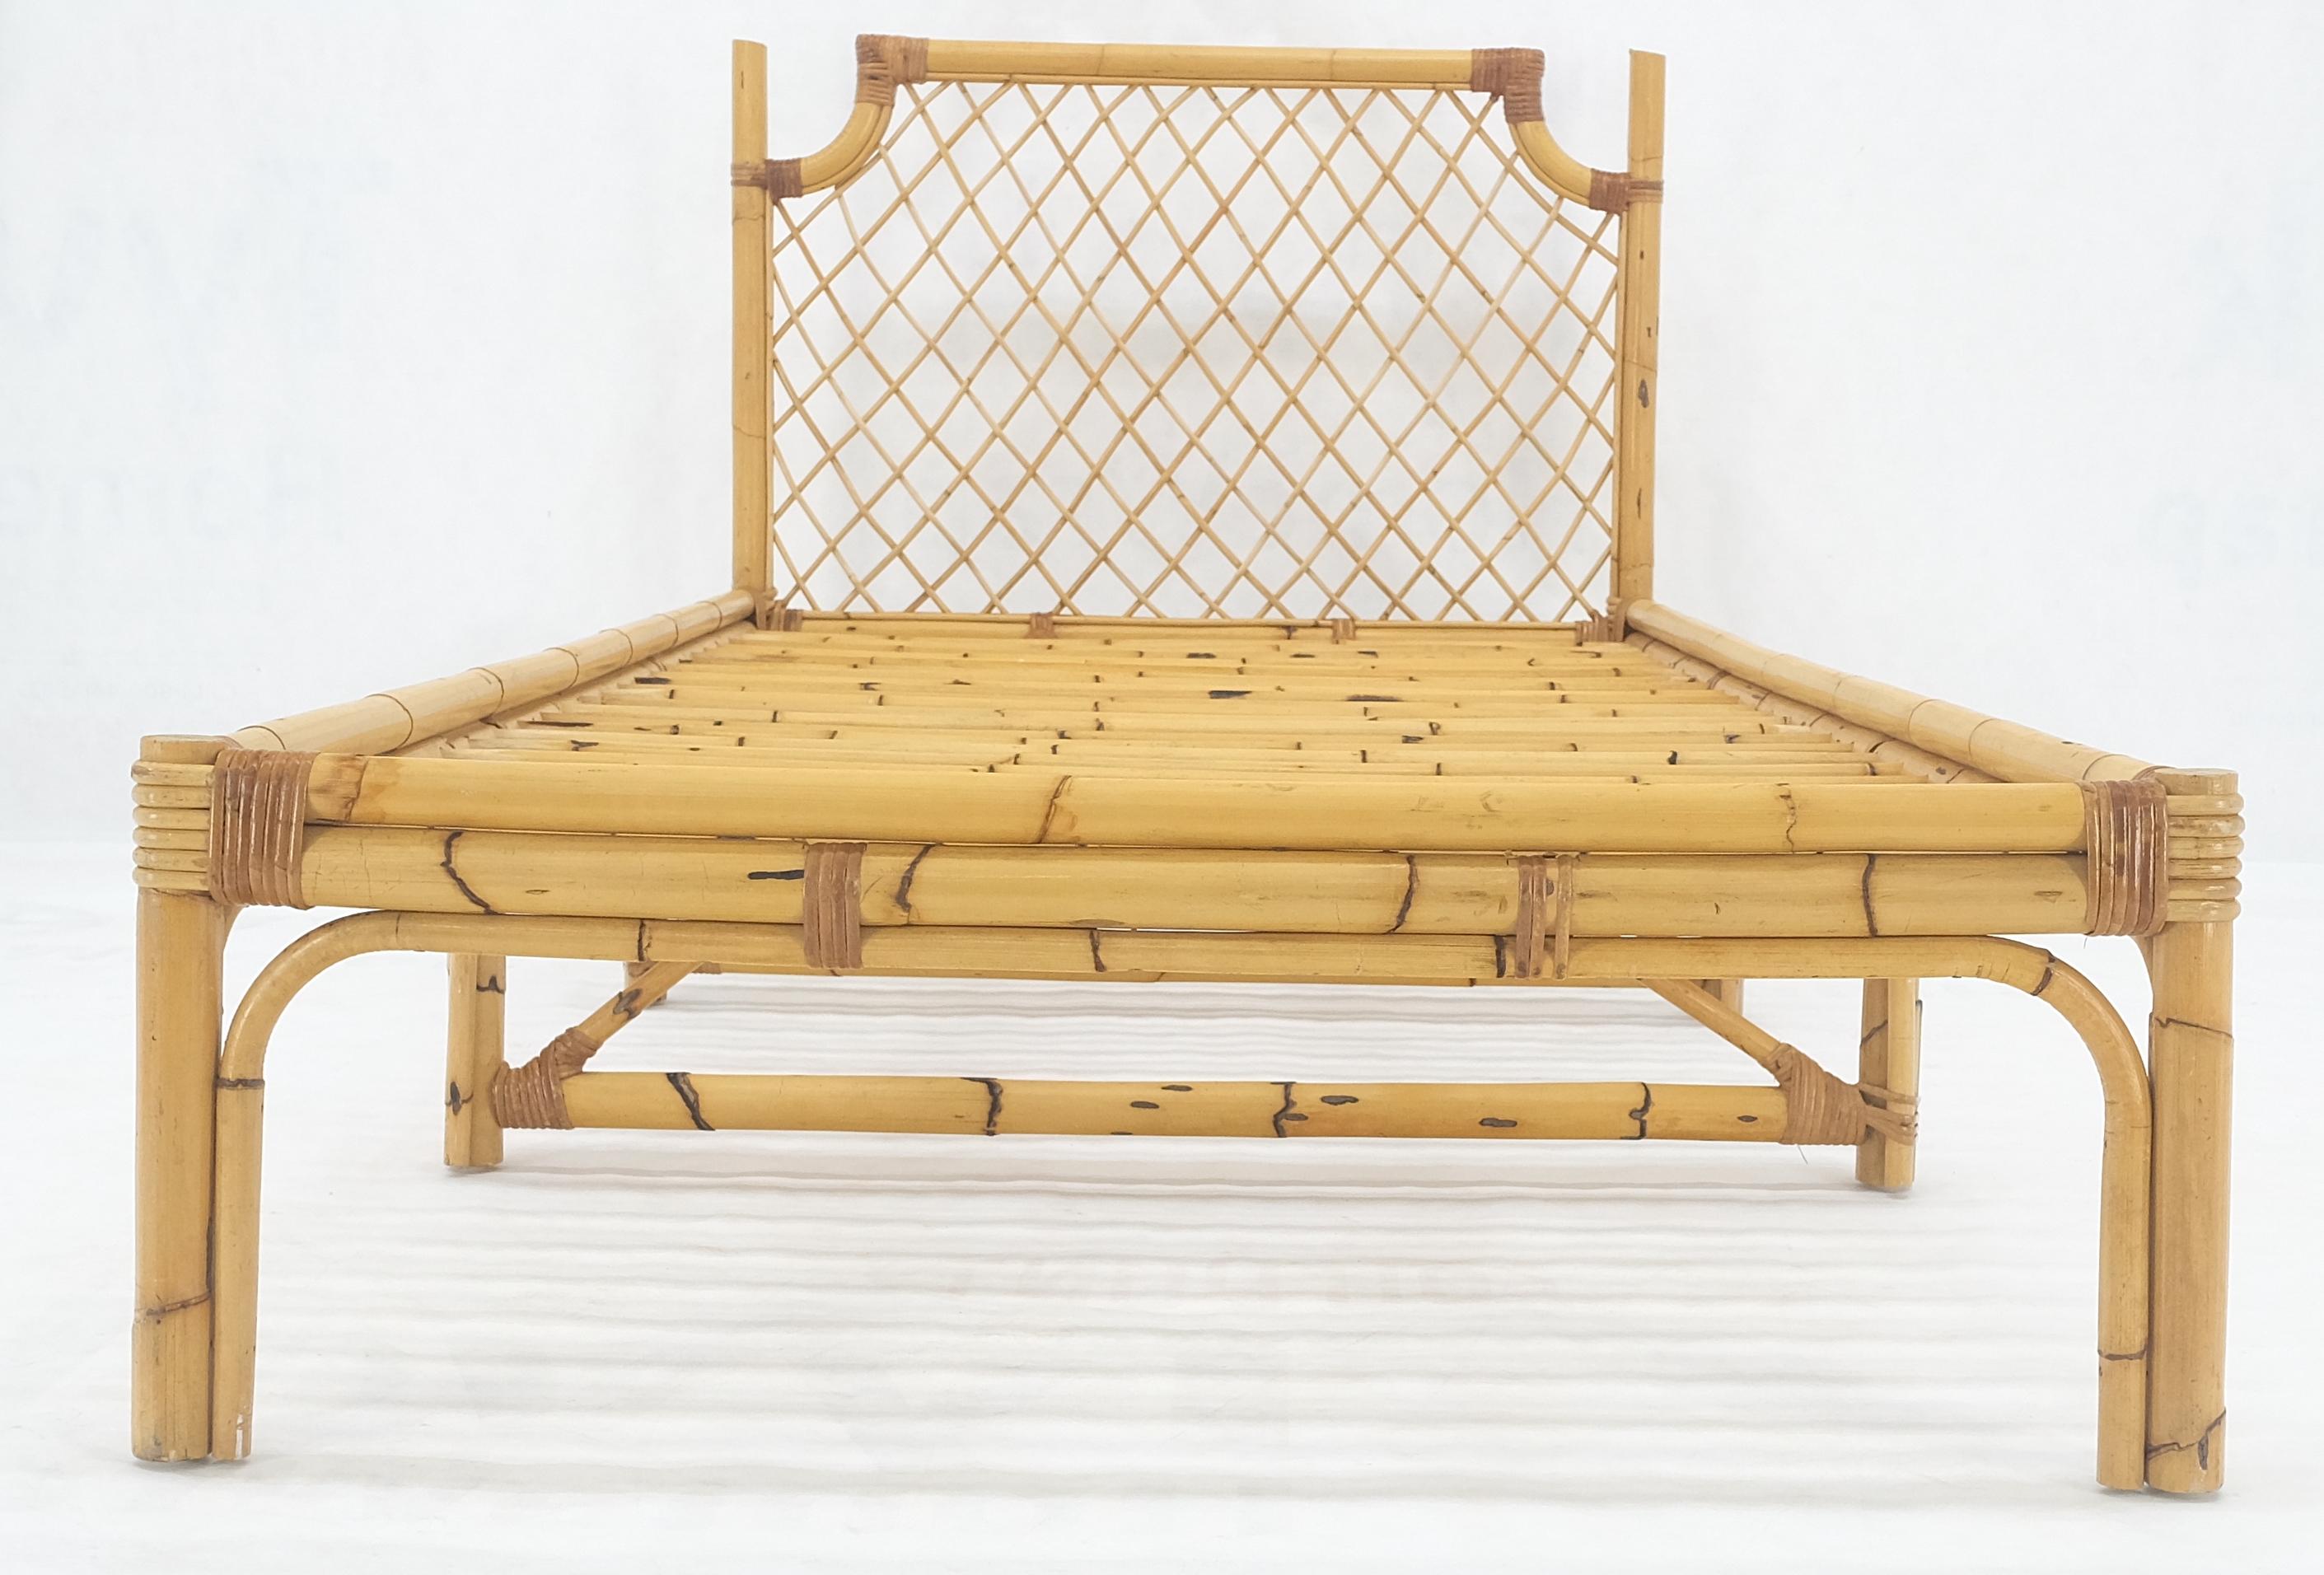 Vintage 1970s Large Bamboo Chaise Lounge Daybed Frame MINT! (Lackiert) im Angebot